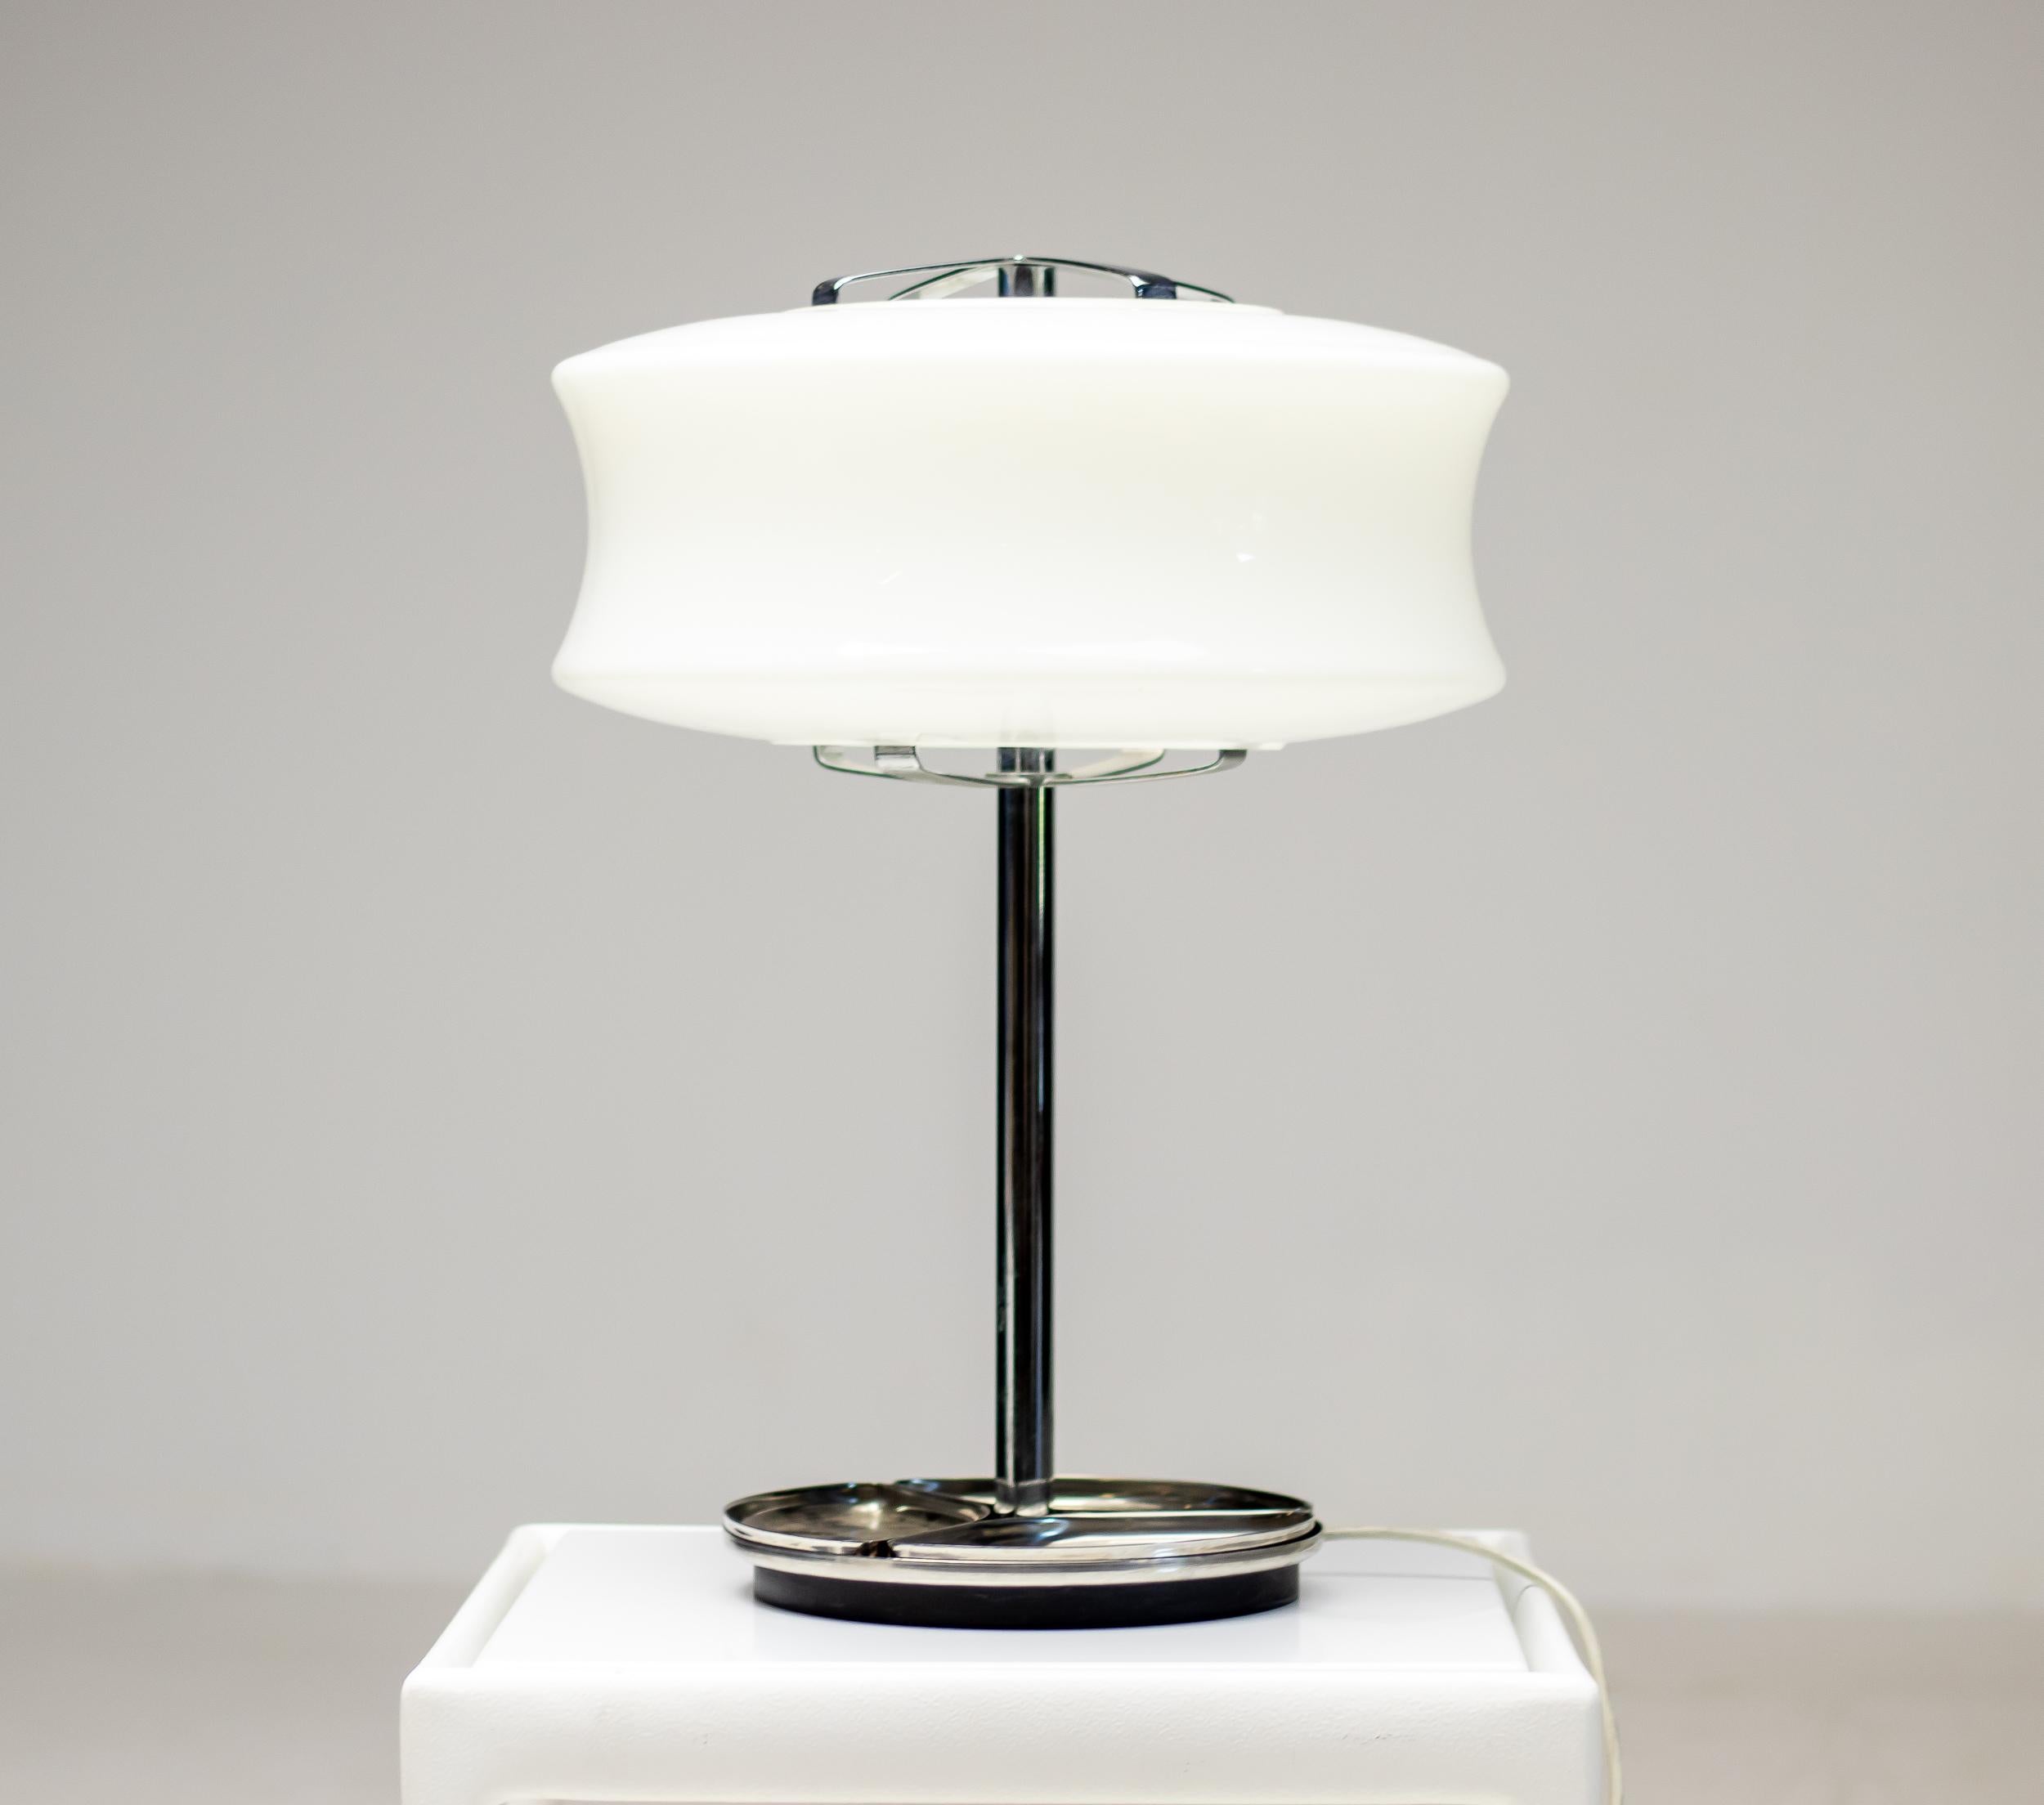 Wonderful large desk lamp lamp made circa 1960 by Valenti, Milano, Italy.
The lamp has a stainless steel frame with three removable trays on the base, and a glossy, opalescent glass lampshade. 
The light is equipped with a solid cast iron disc under